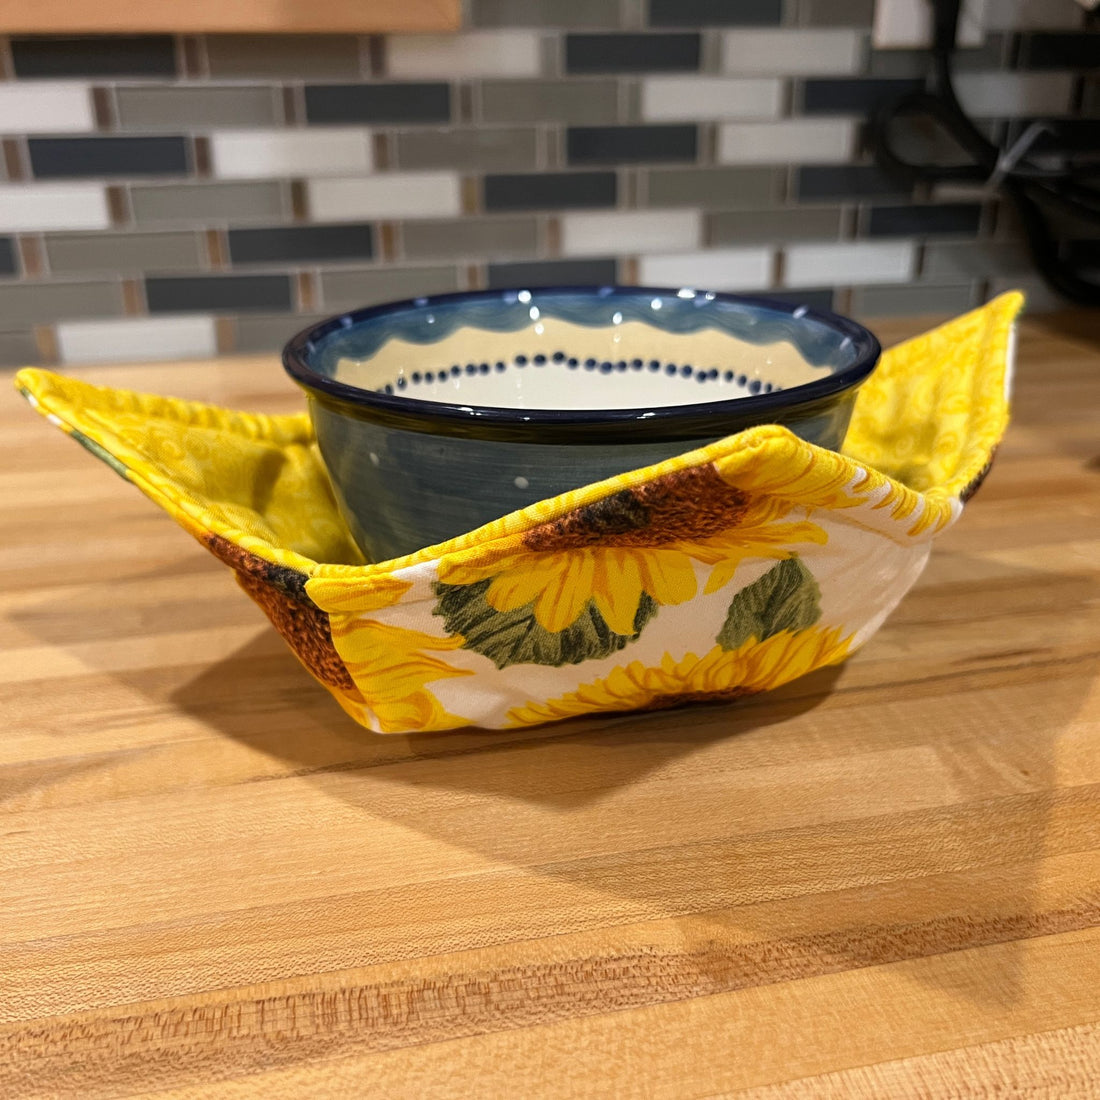 Enhance Your Kitchen With Microwaveable Bowl Cozies